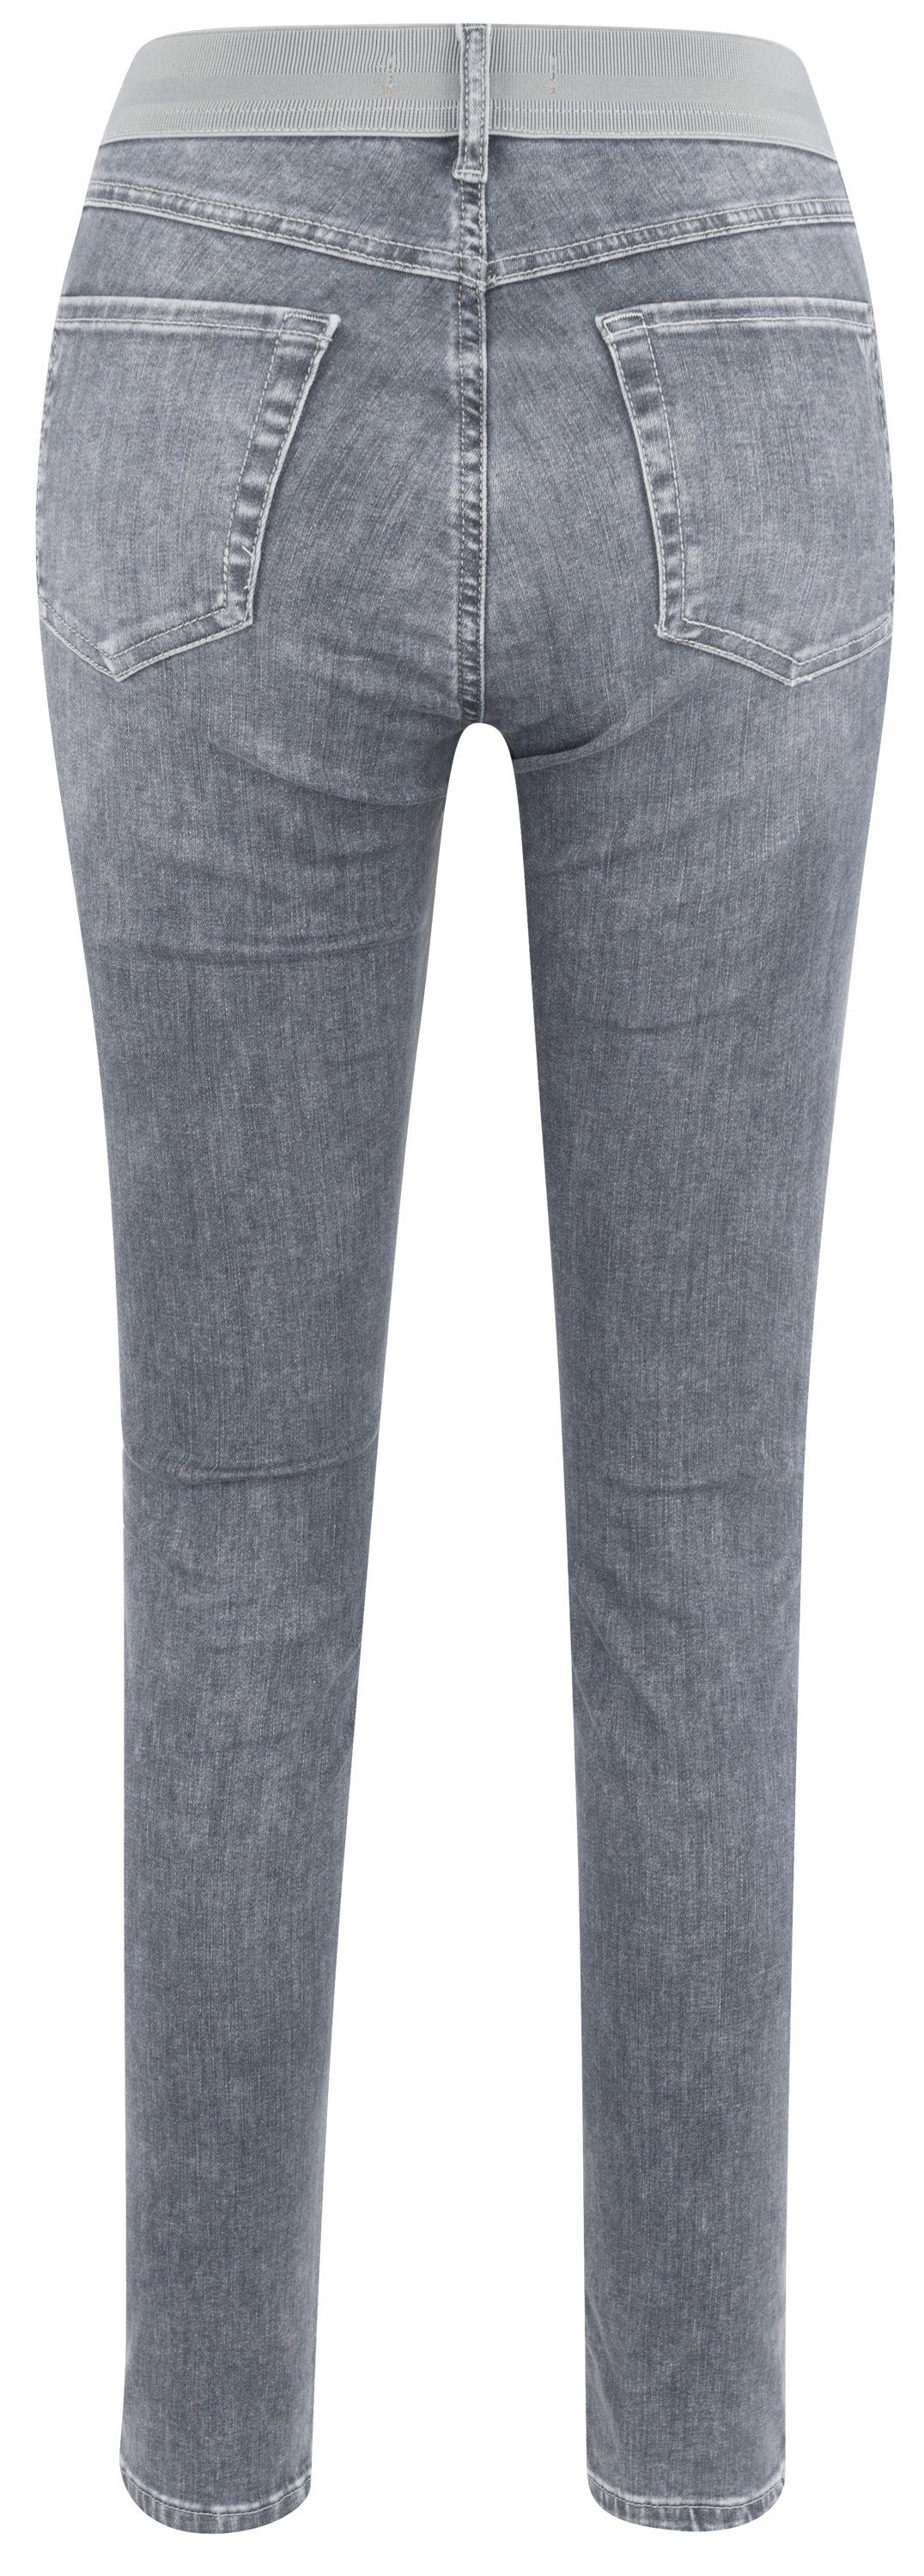 grey JEANS ANGELS ONE mid 1358 grey mid used 123730.1358 399 used Stretch-Jeans SIZE ANGELS